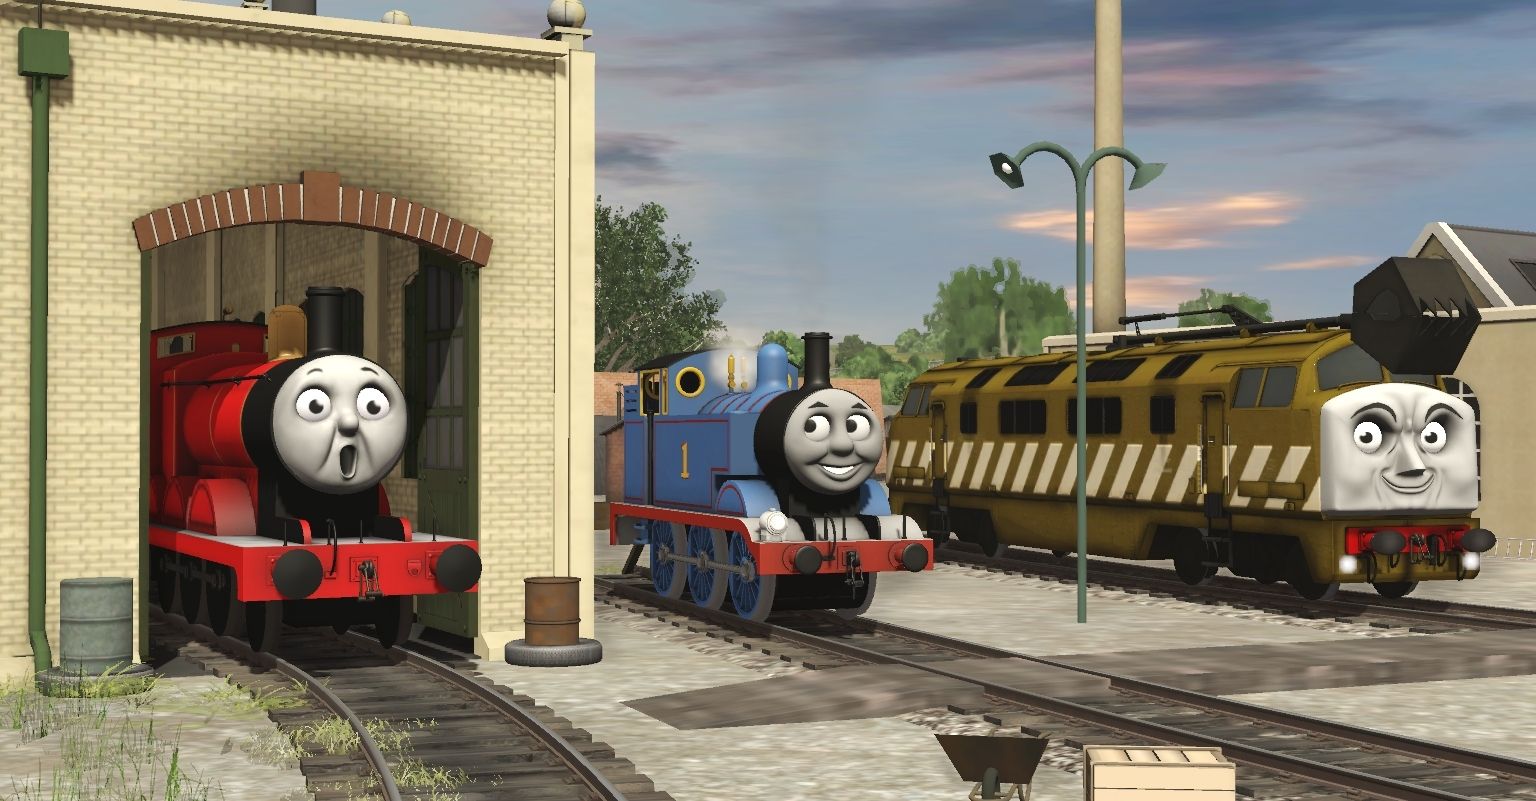 si3d and sodor workshops